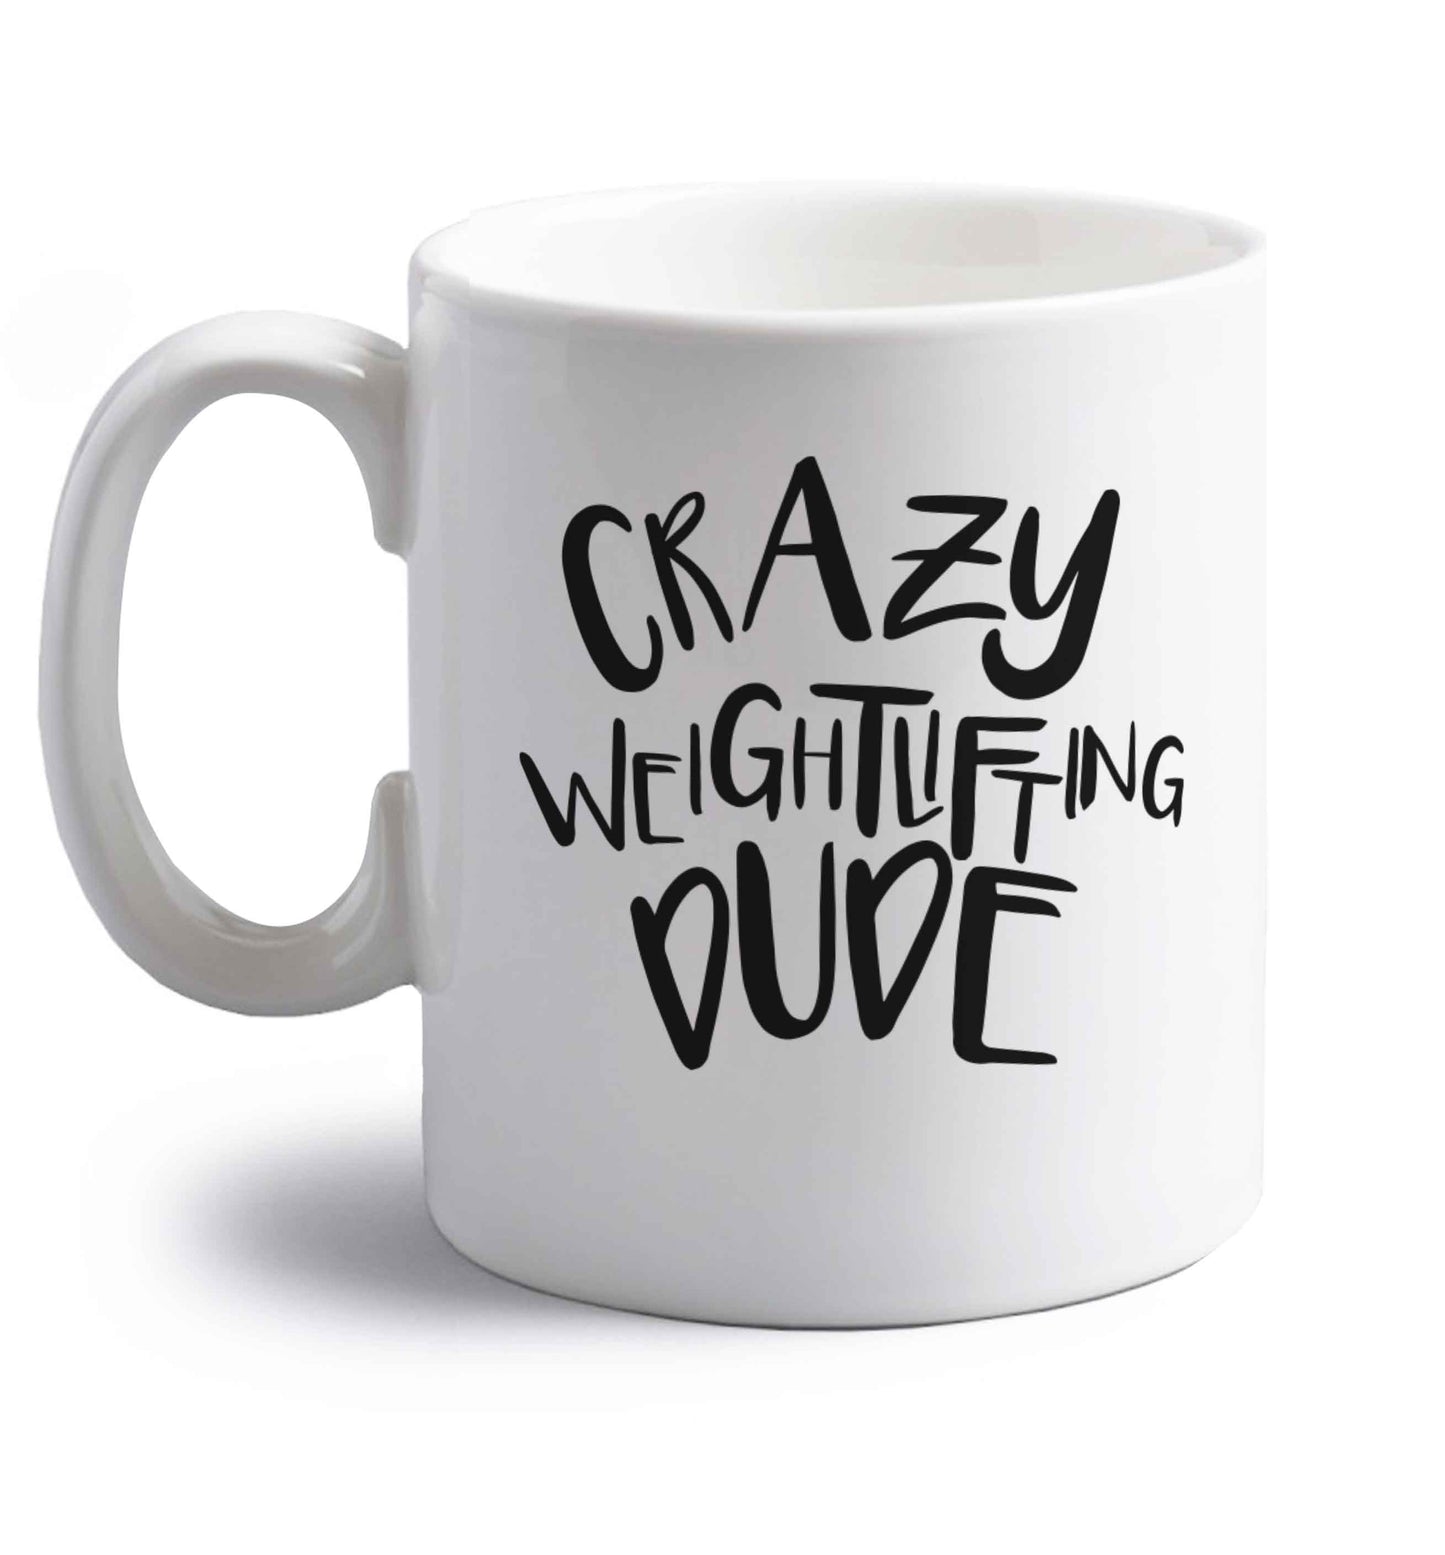 Crazy weightlifting dude right handed white ceramic mug 